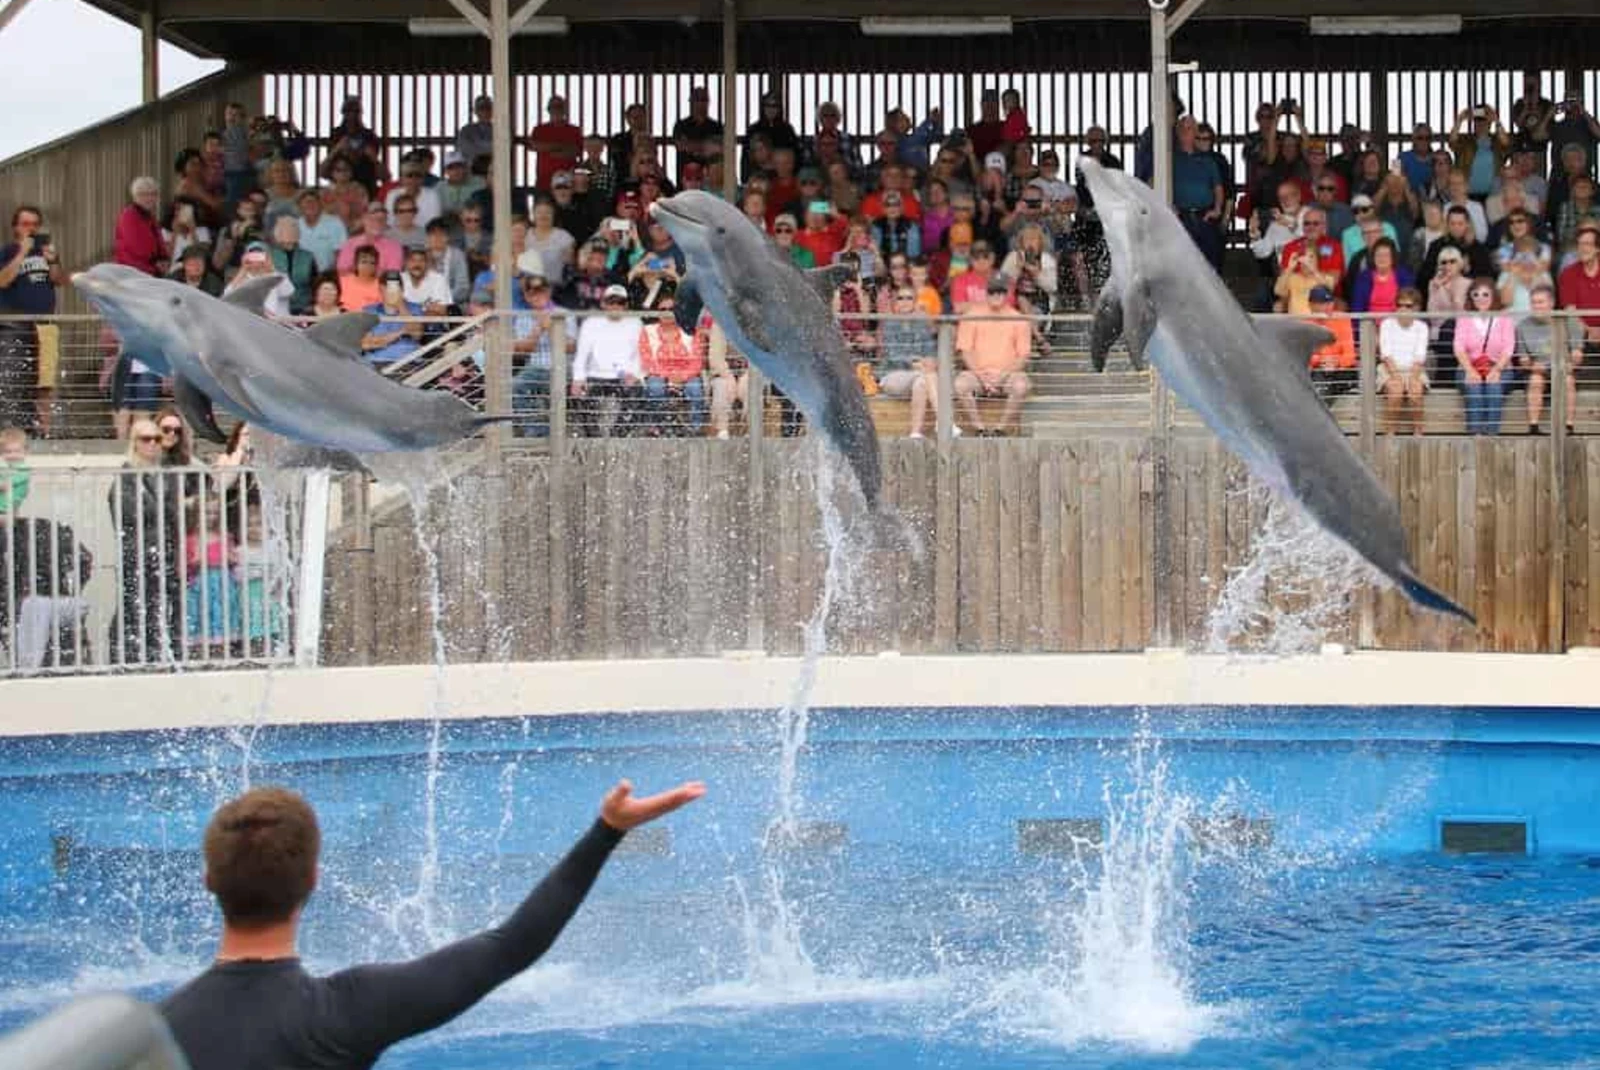 3 dolphin jump into the air from a pool at a show